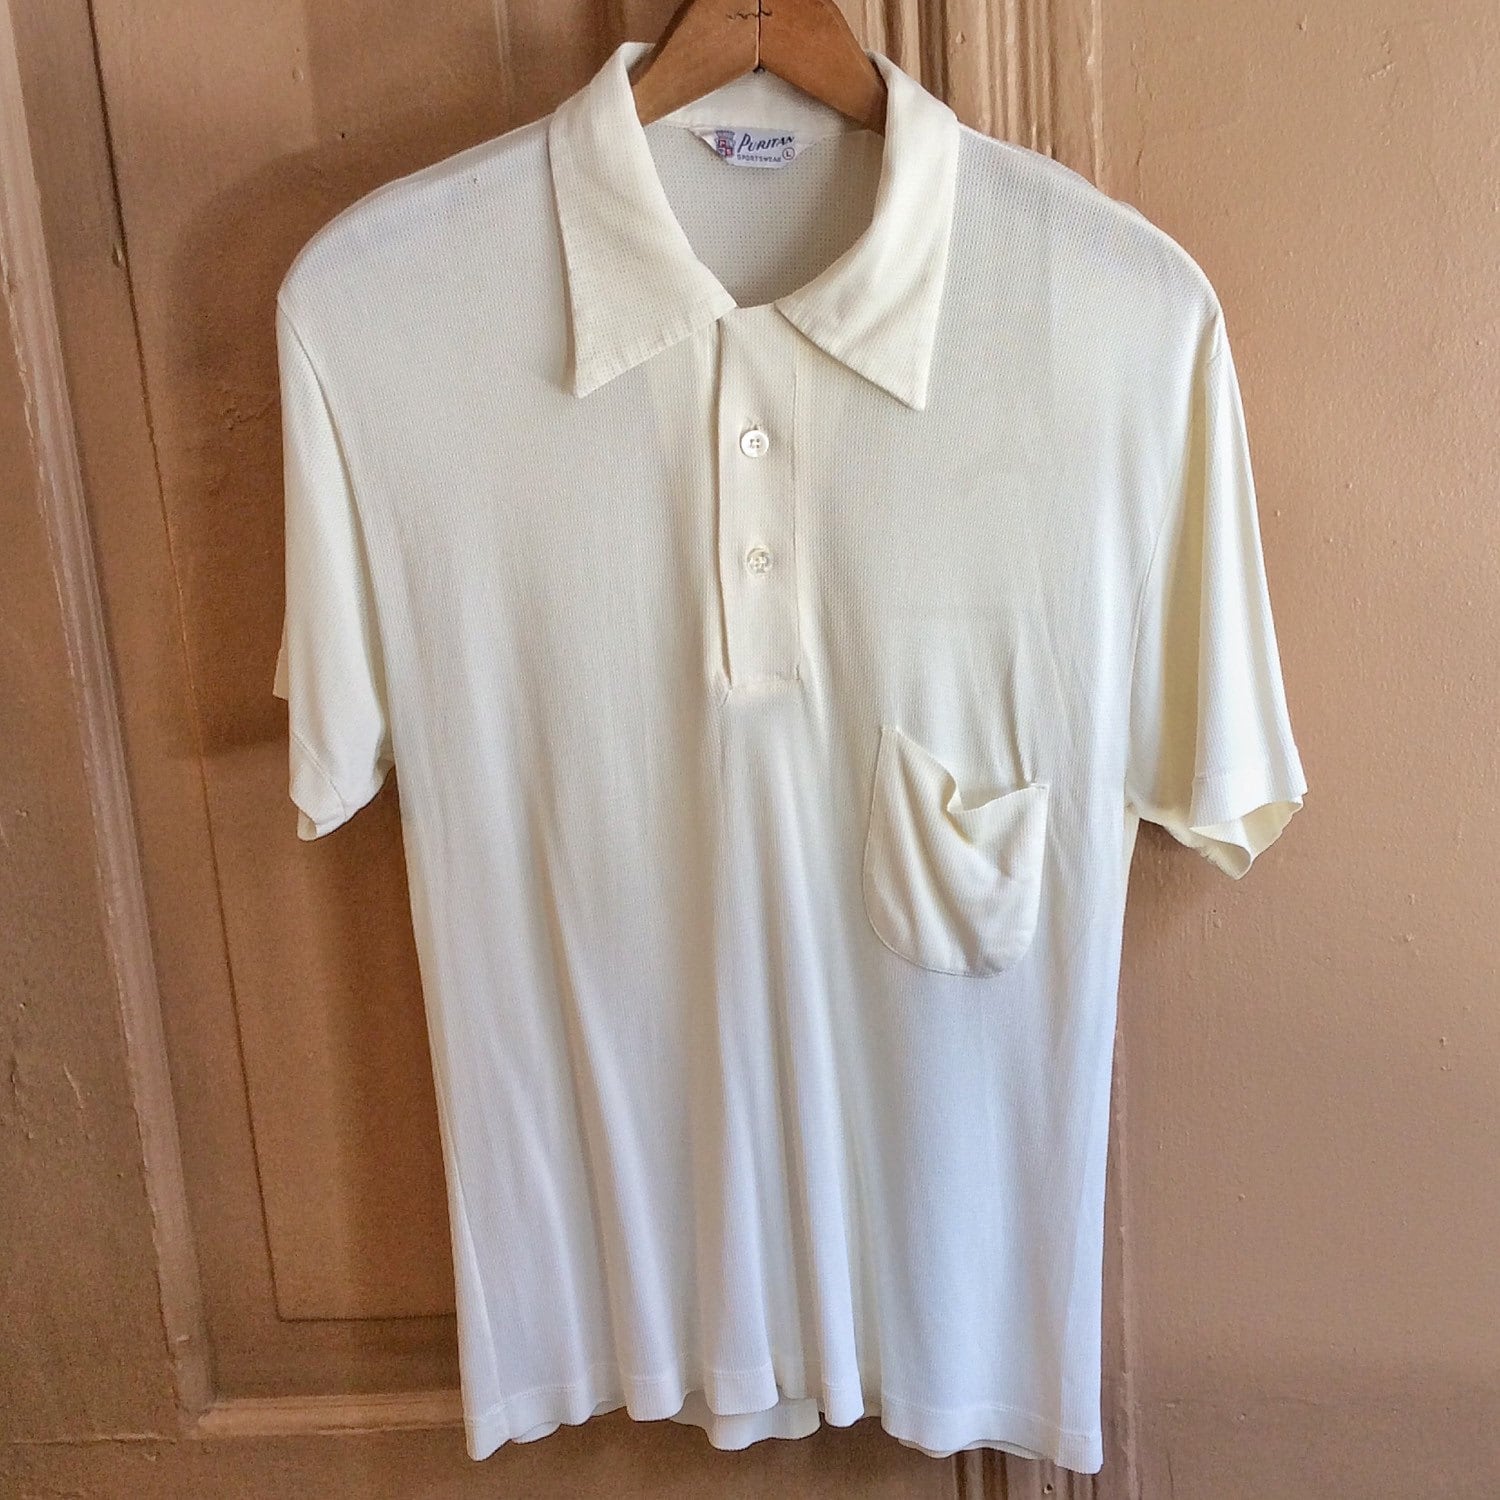 Vintage 1950s White Loop Collar Polo Shirt by Puritan